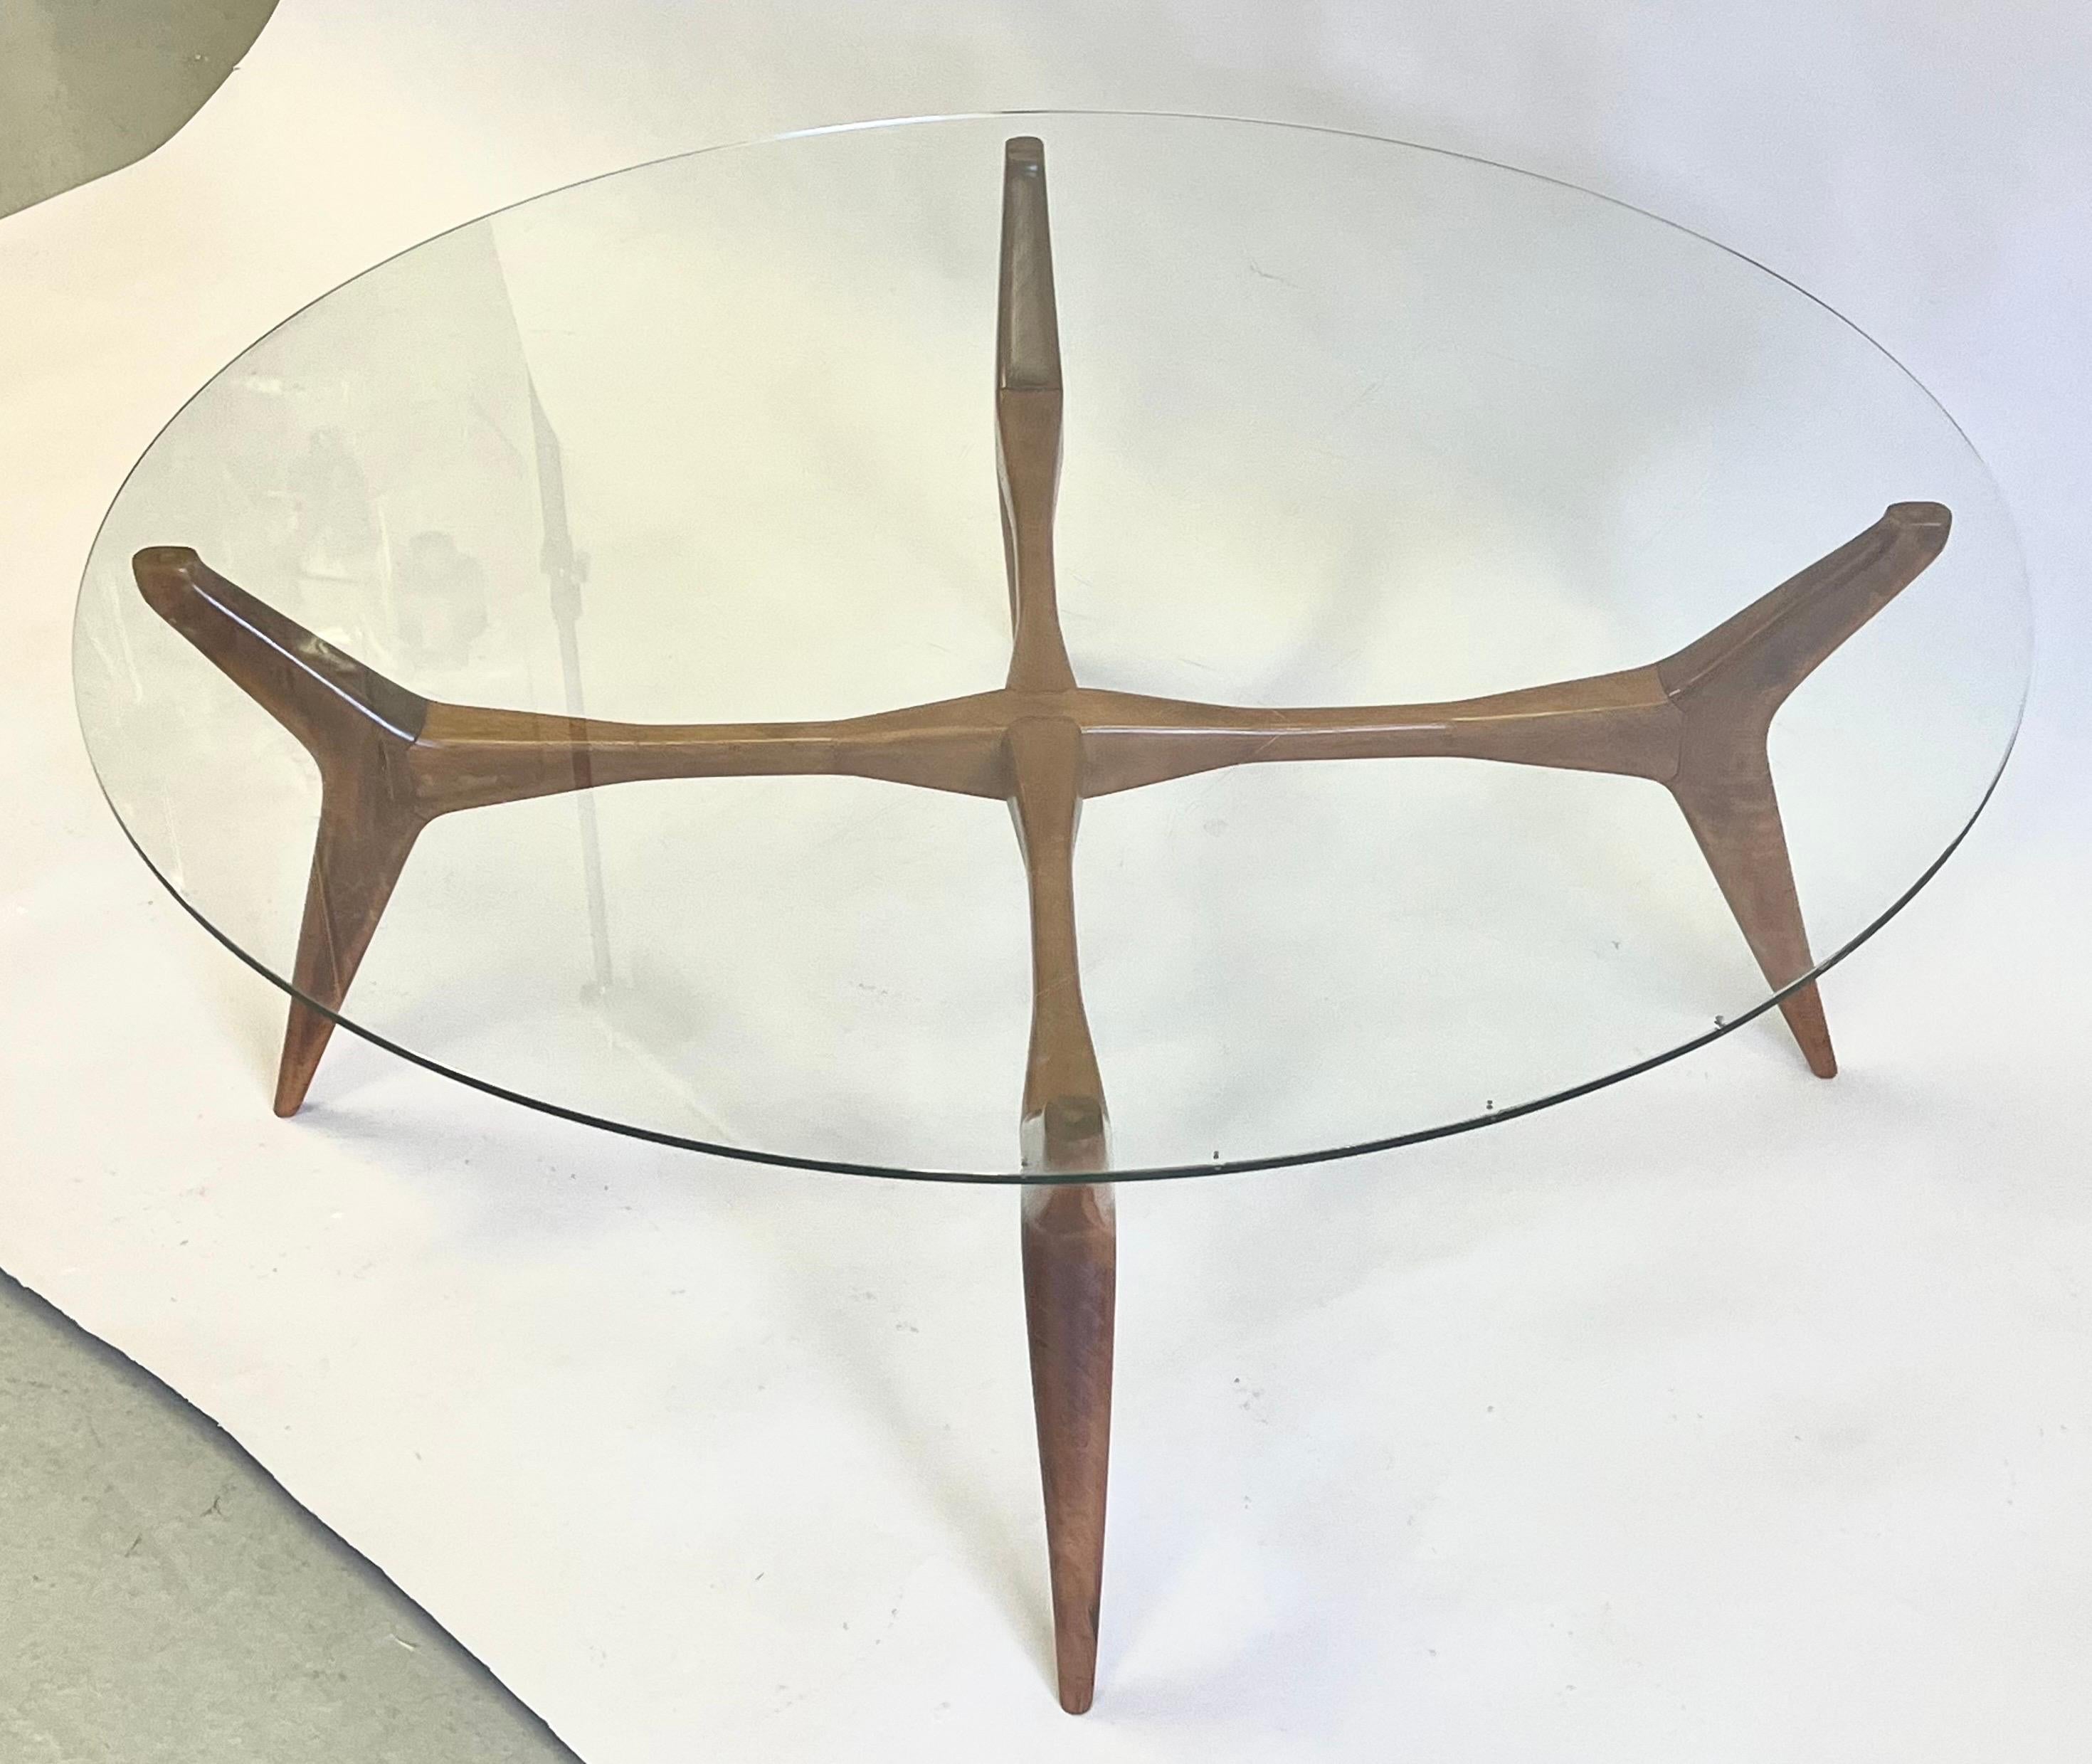 Italian Mid-Century Modern Walnut & Glass Circular Coffee Table by Gio Ponti  In Good Condition For Sale In New York, NY